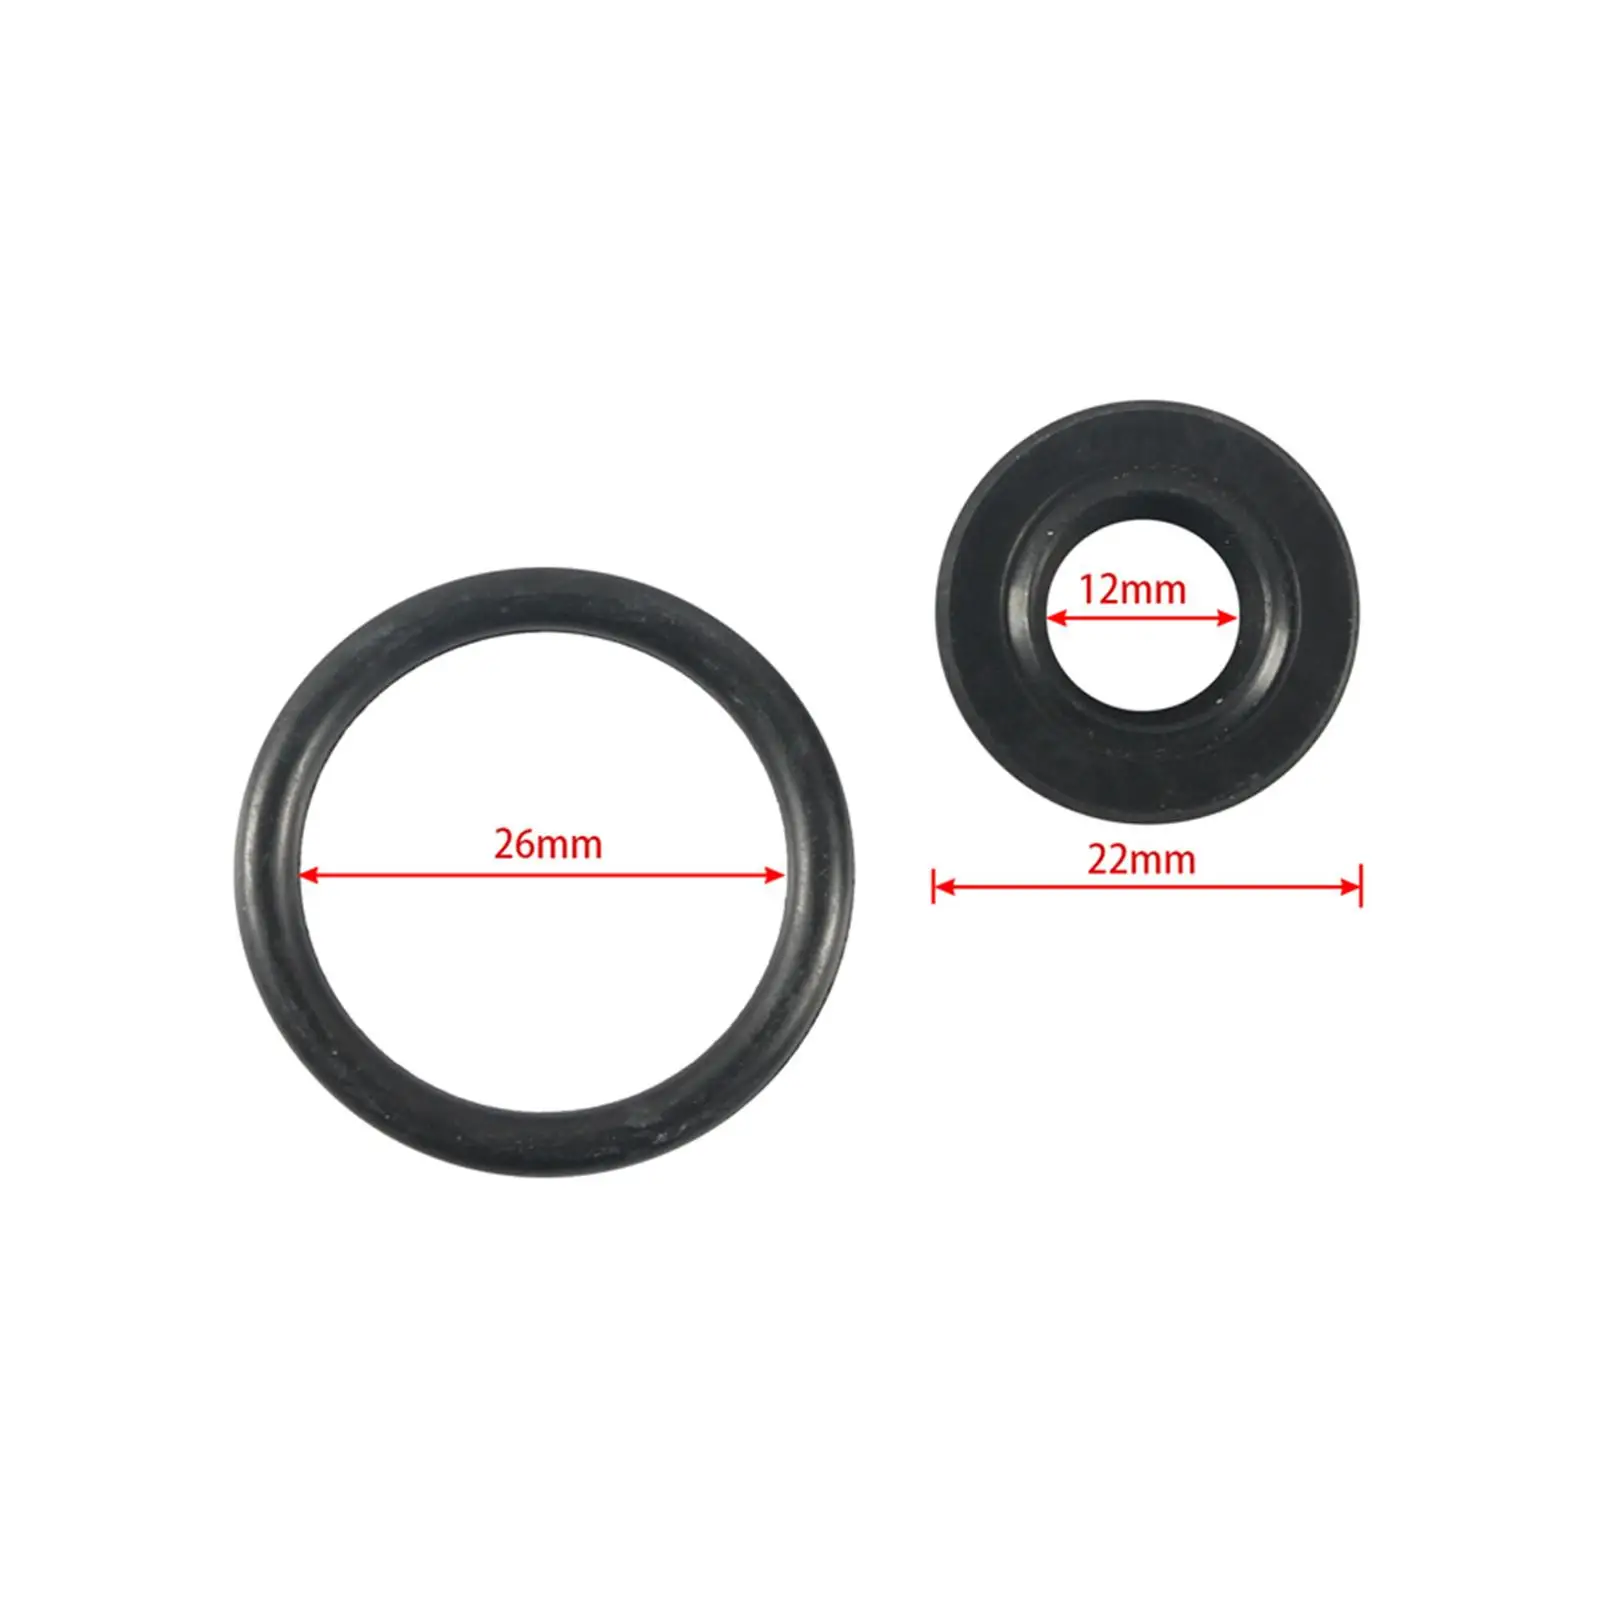 BH3888E0 Oil Leaks ring Replacement Oil Distributor Seal Replace BH3888-E0 for Honda Cr-2001